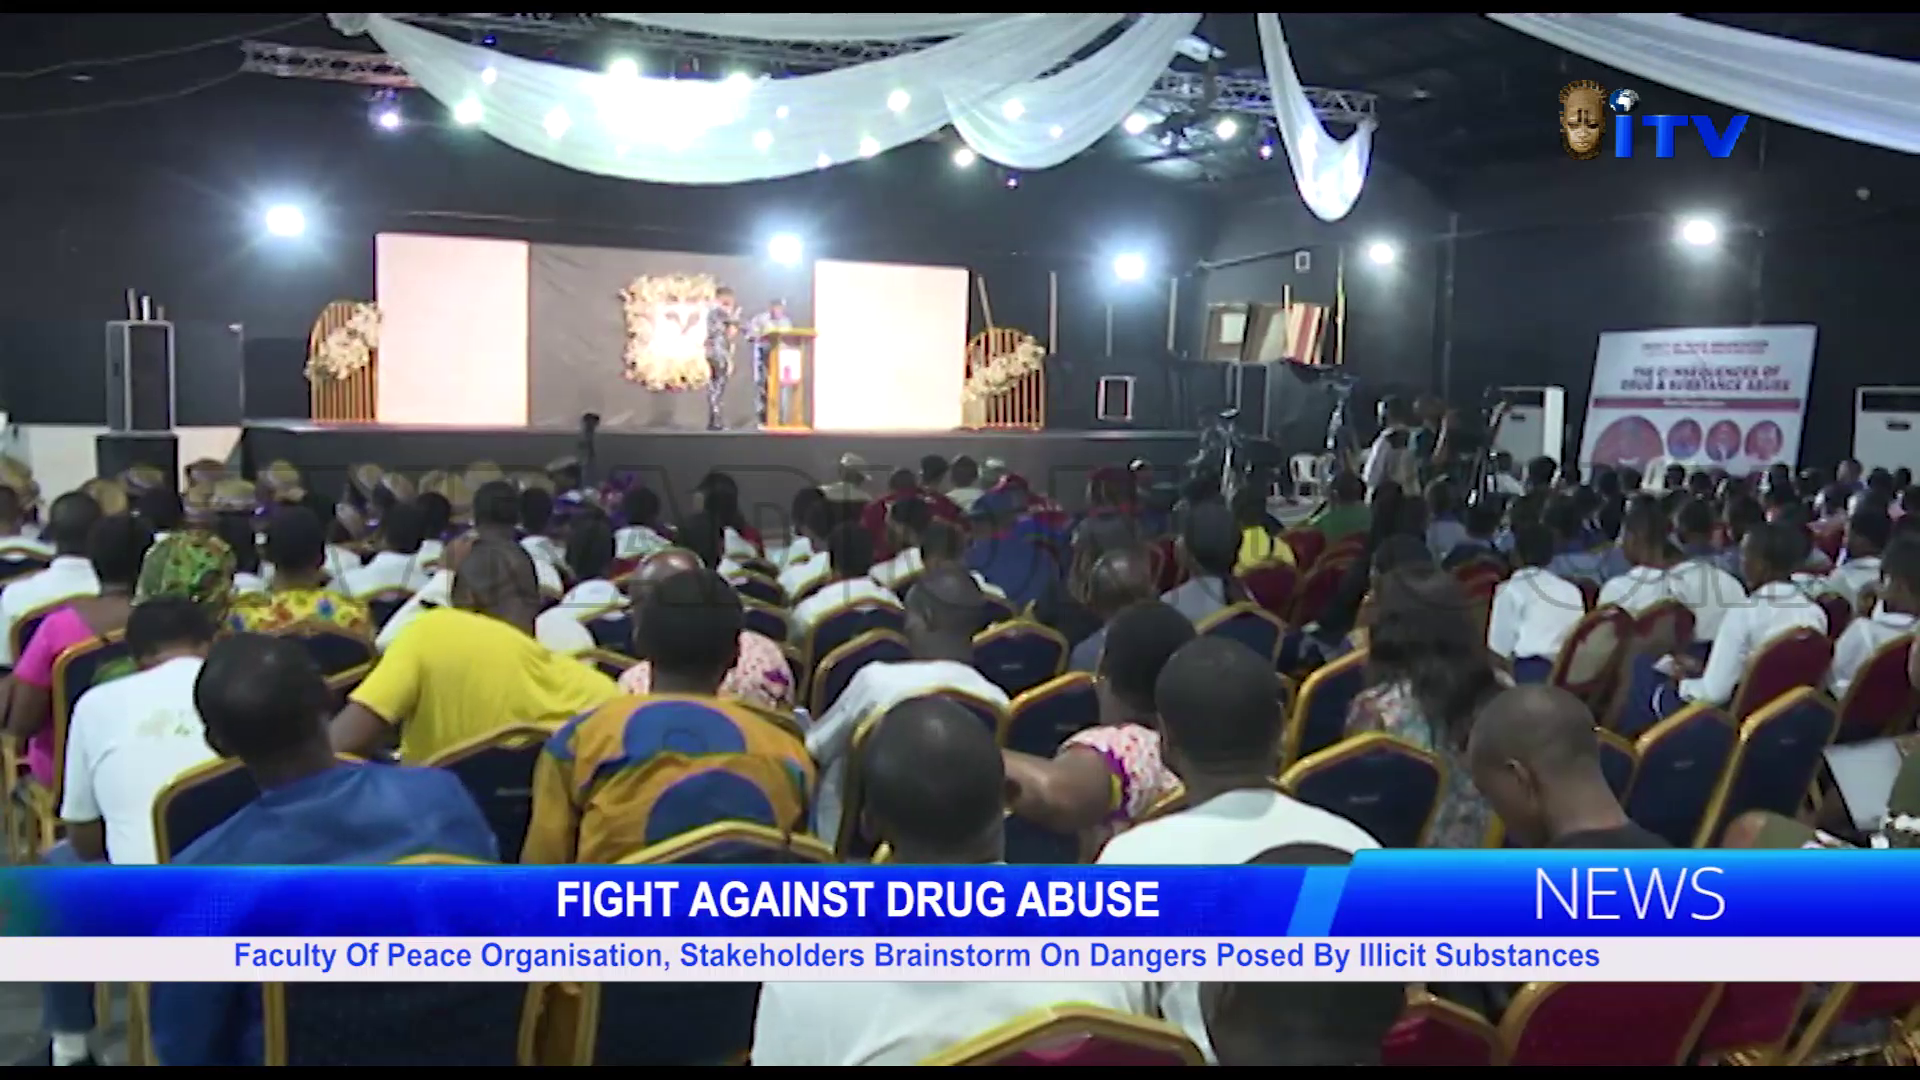 Faculty Of Peace Organisation, Stakeholders Brainstorm On Dangers Posed By Illicit Substances